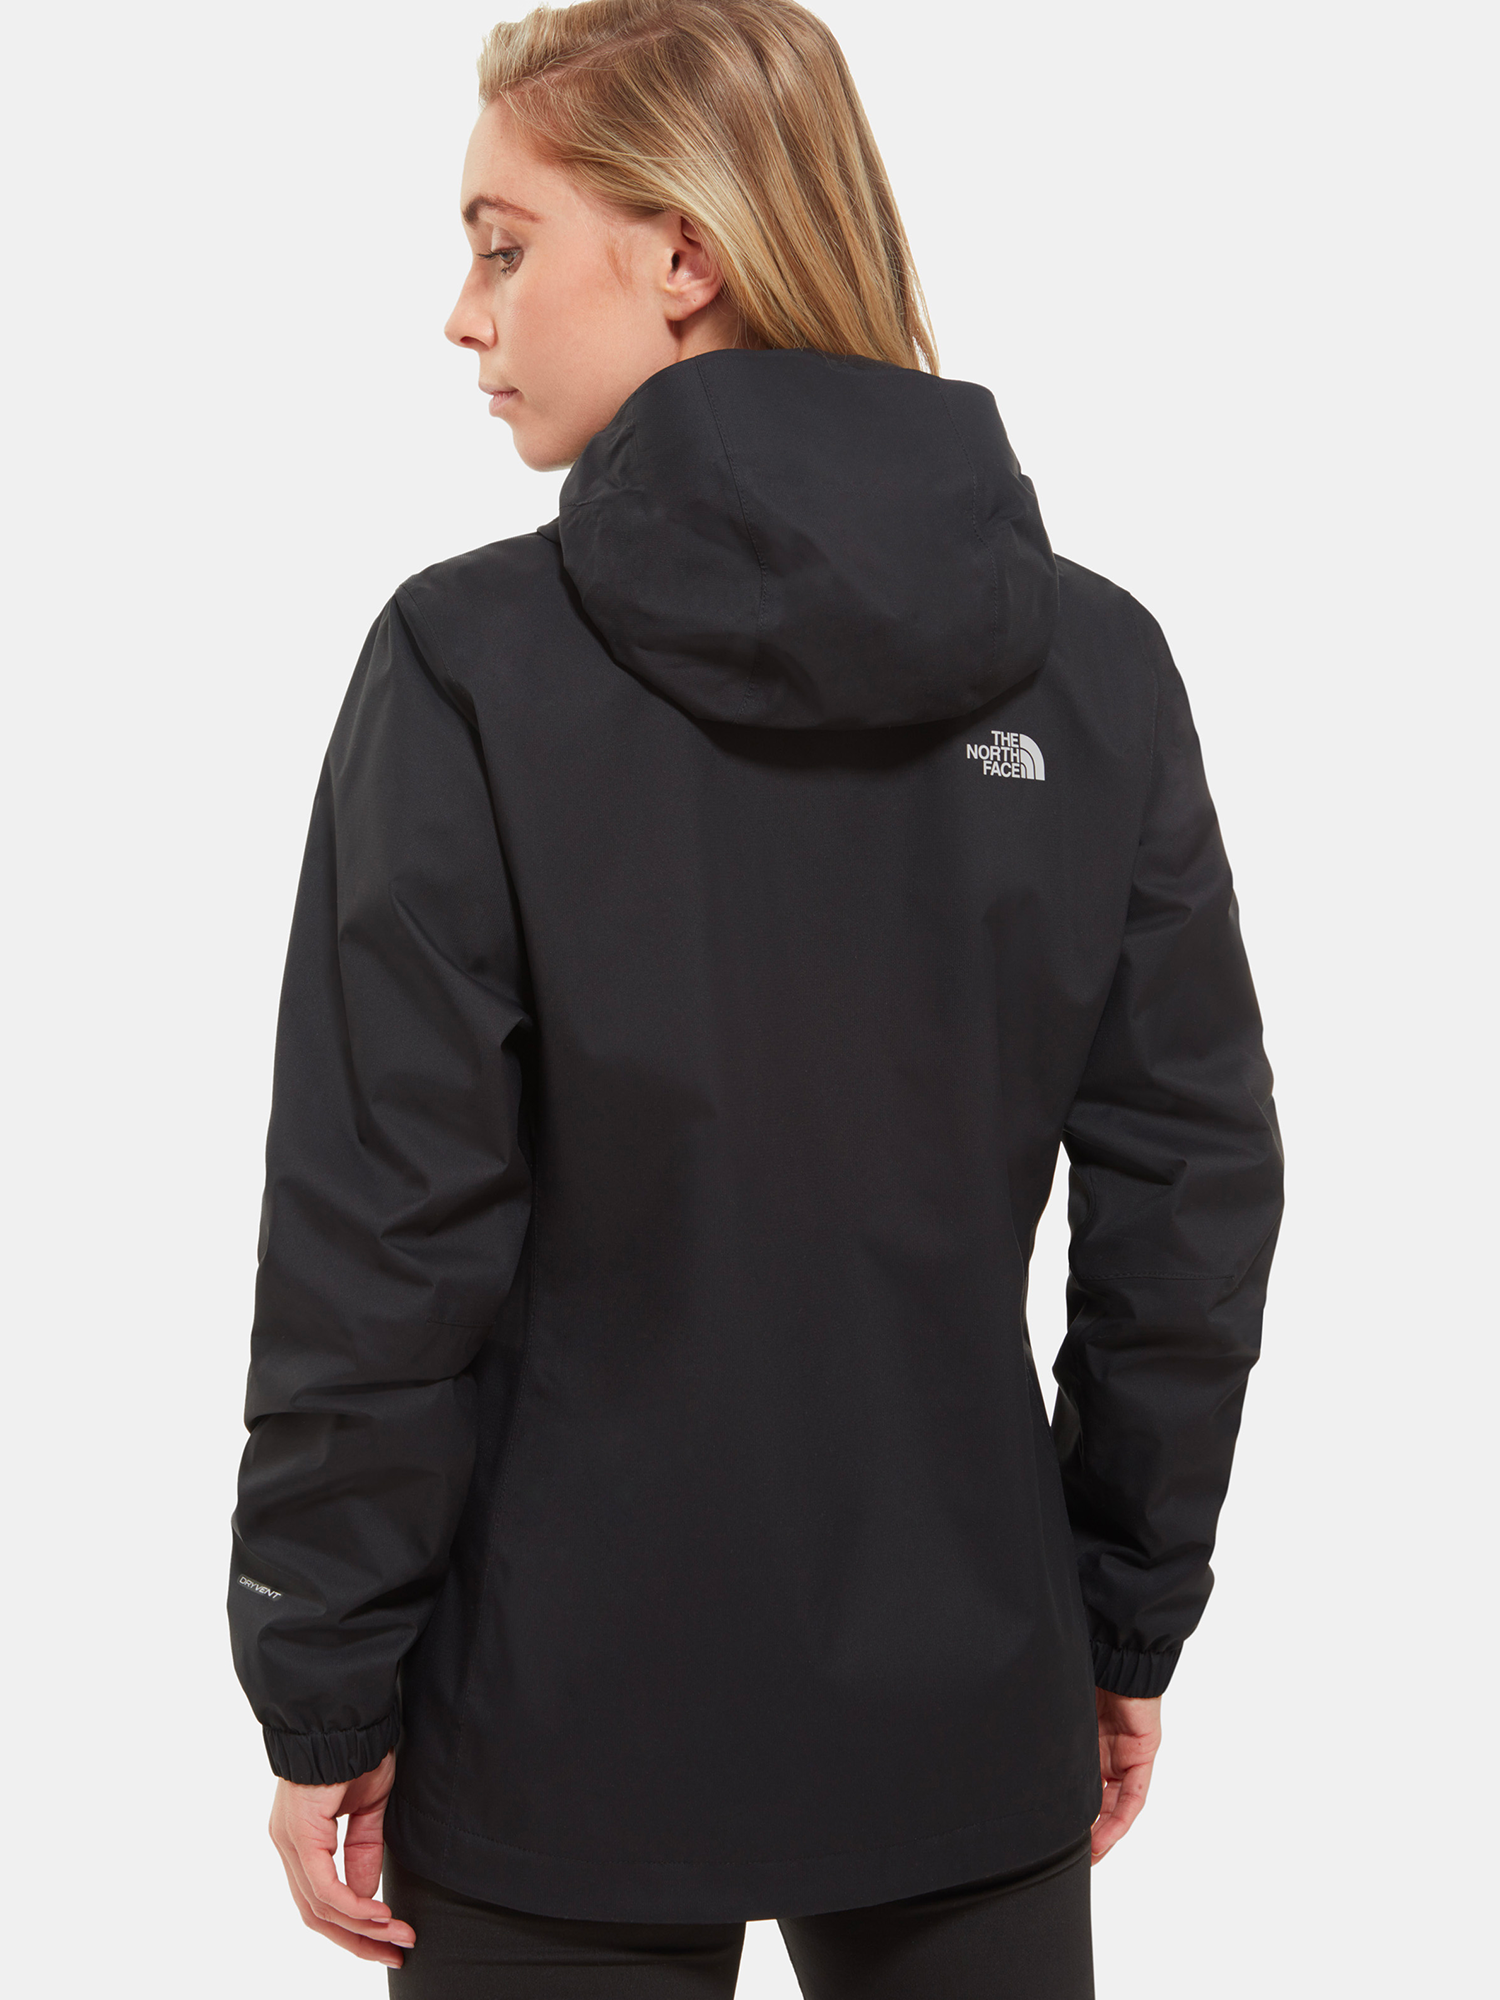 THE NORTH FACE Jacke Quest in Schwarz 